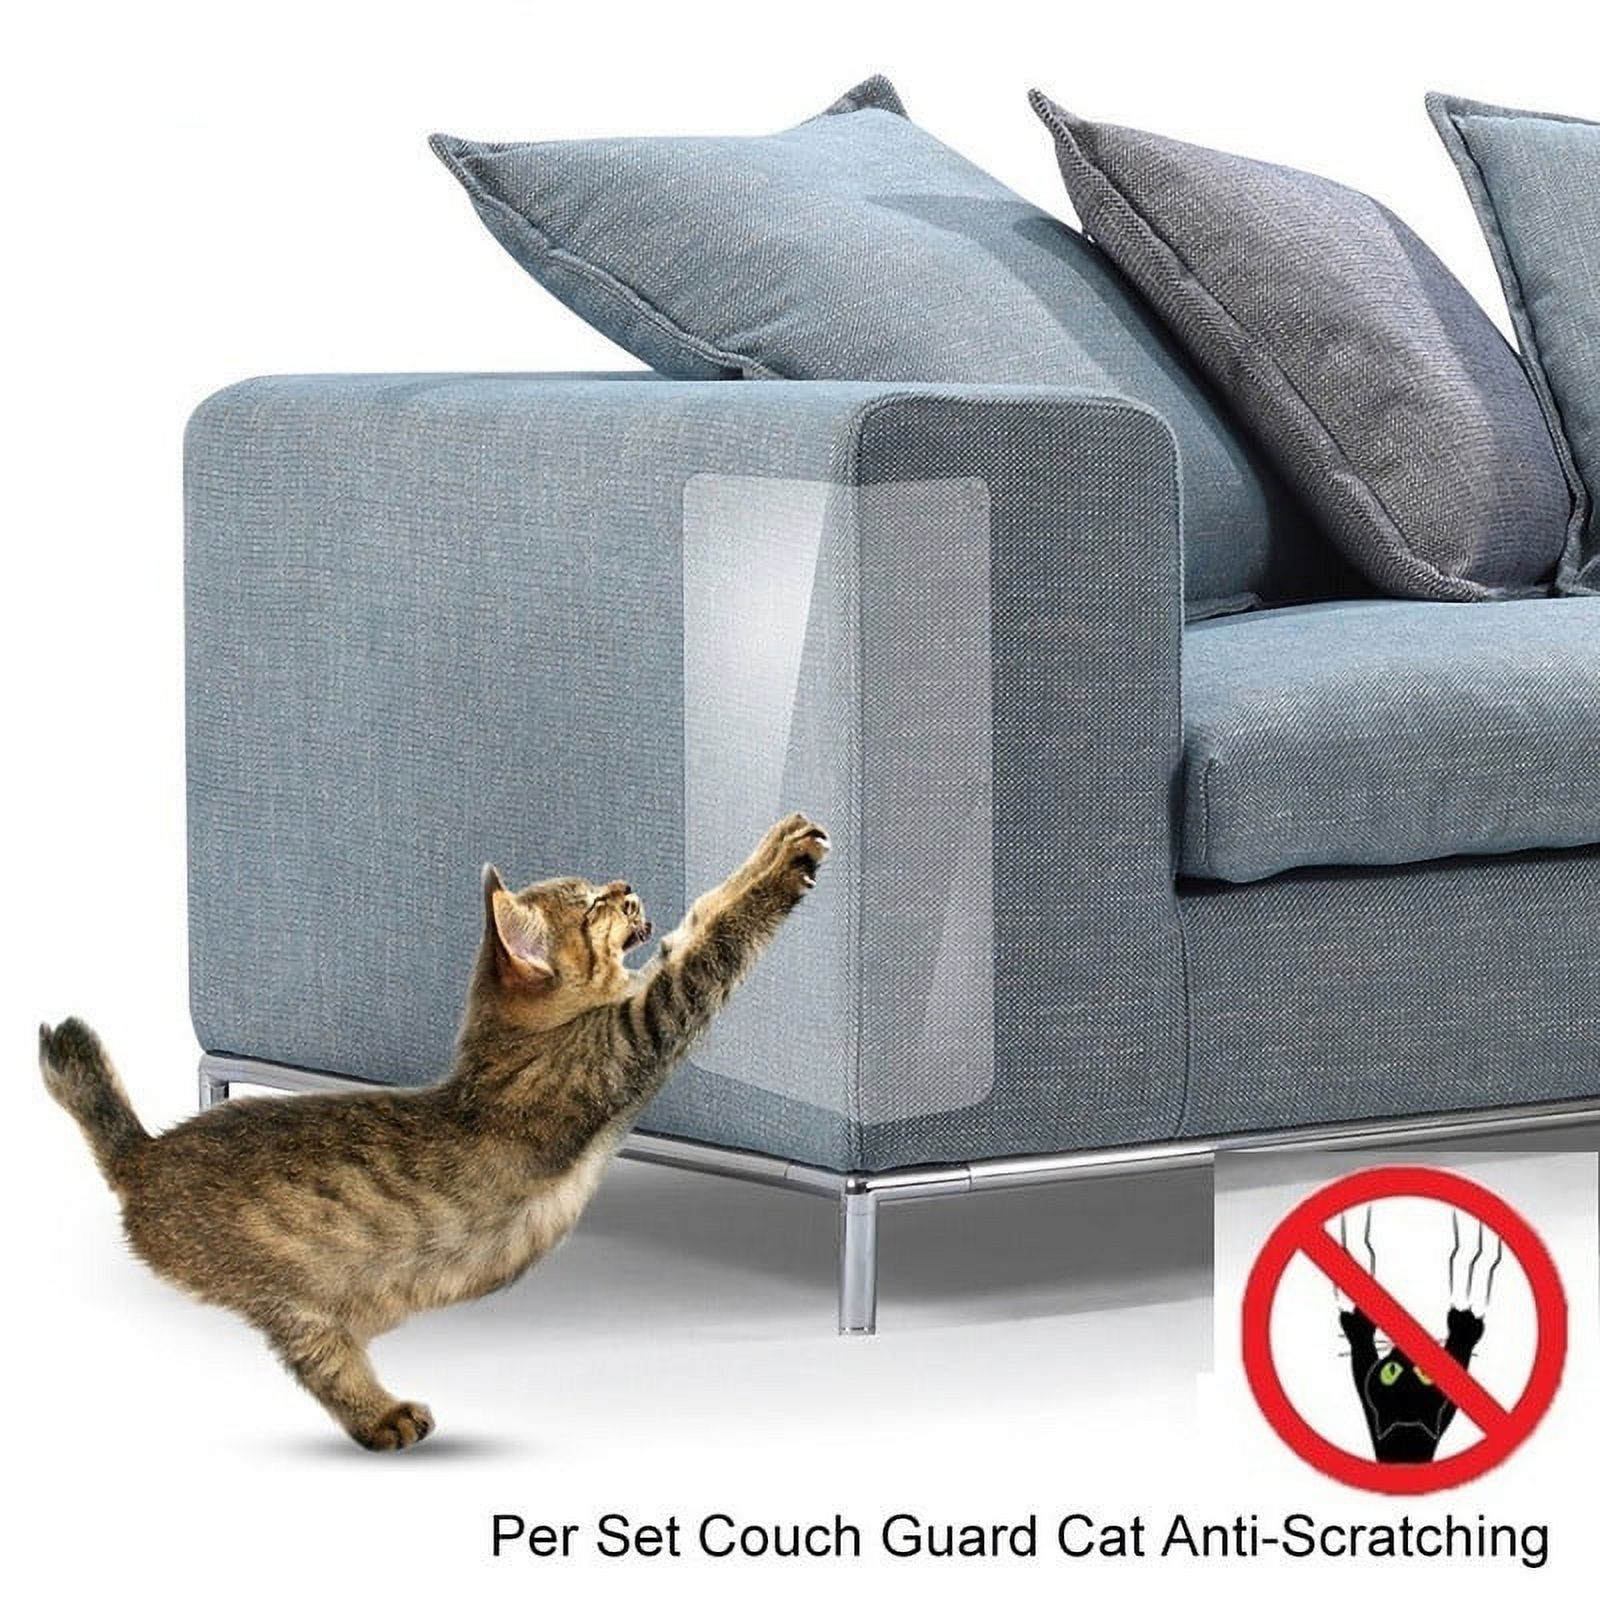 2/4/6/10PCS Couch Guard Cat Anti-Scratching Protector Sofa Furniture Self-Adhesive Cat Scratching Guard Cat Furniture Sofa Anti-Scratch Sticker for Cat Scratching or Clawing Furniture Protector - image 1 of 9